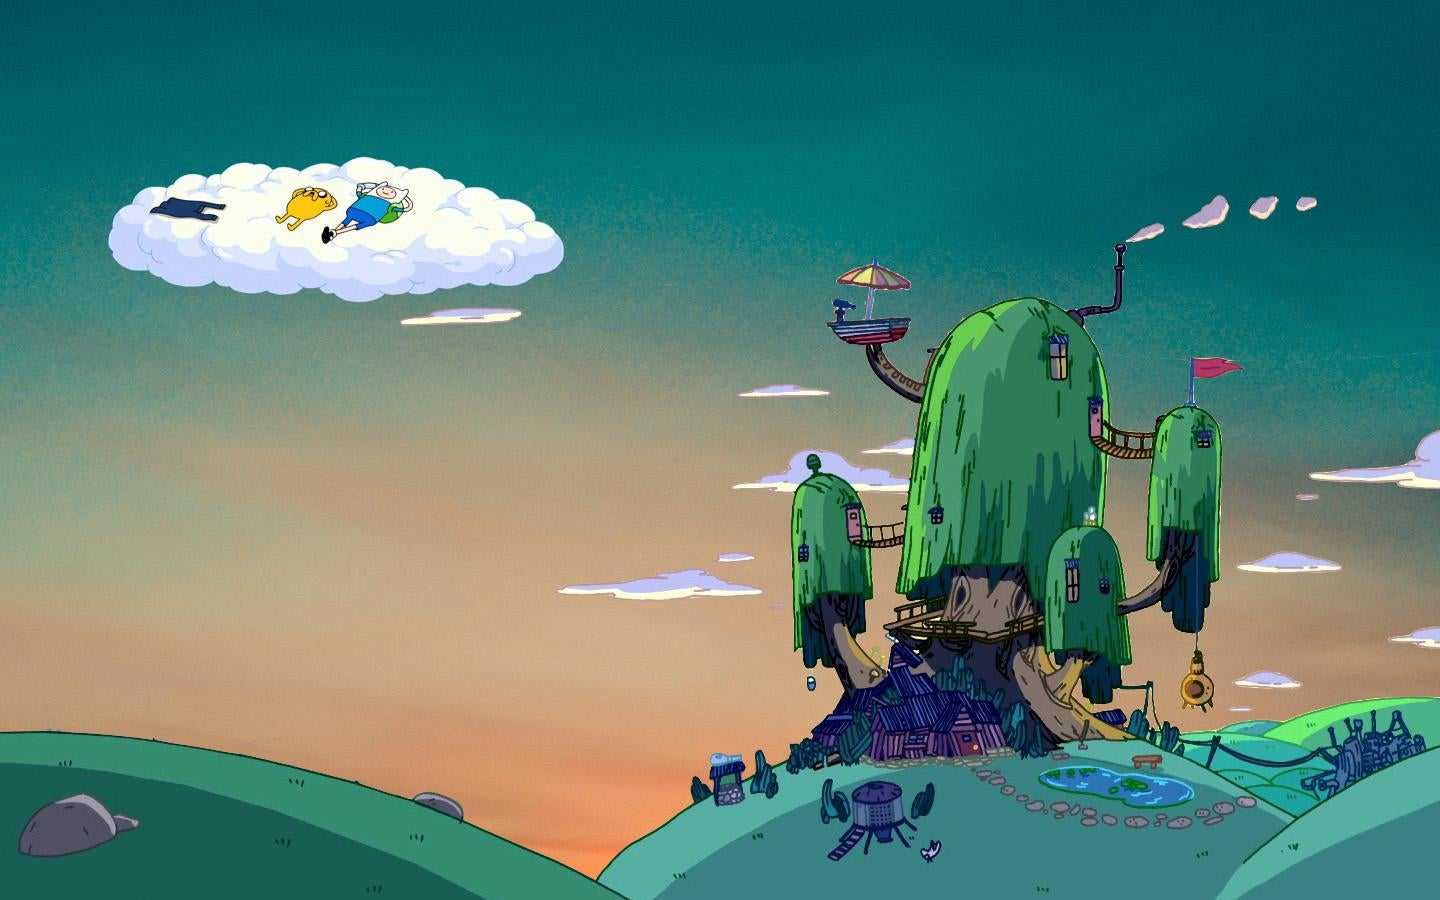 Finn flying above a treehouse on a cloud in Adventure Time. - Adventure Time